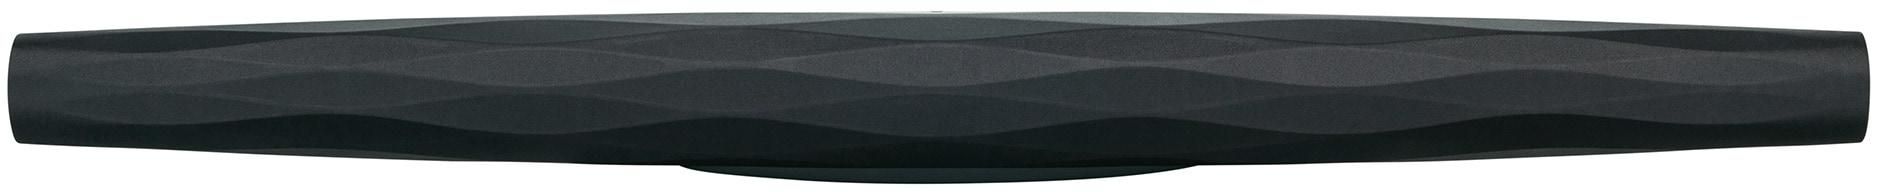 Bowers & Wilkins Formation Wireless Bar zoom image